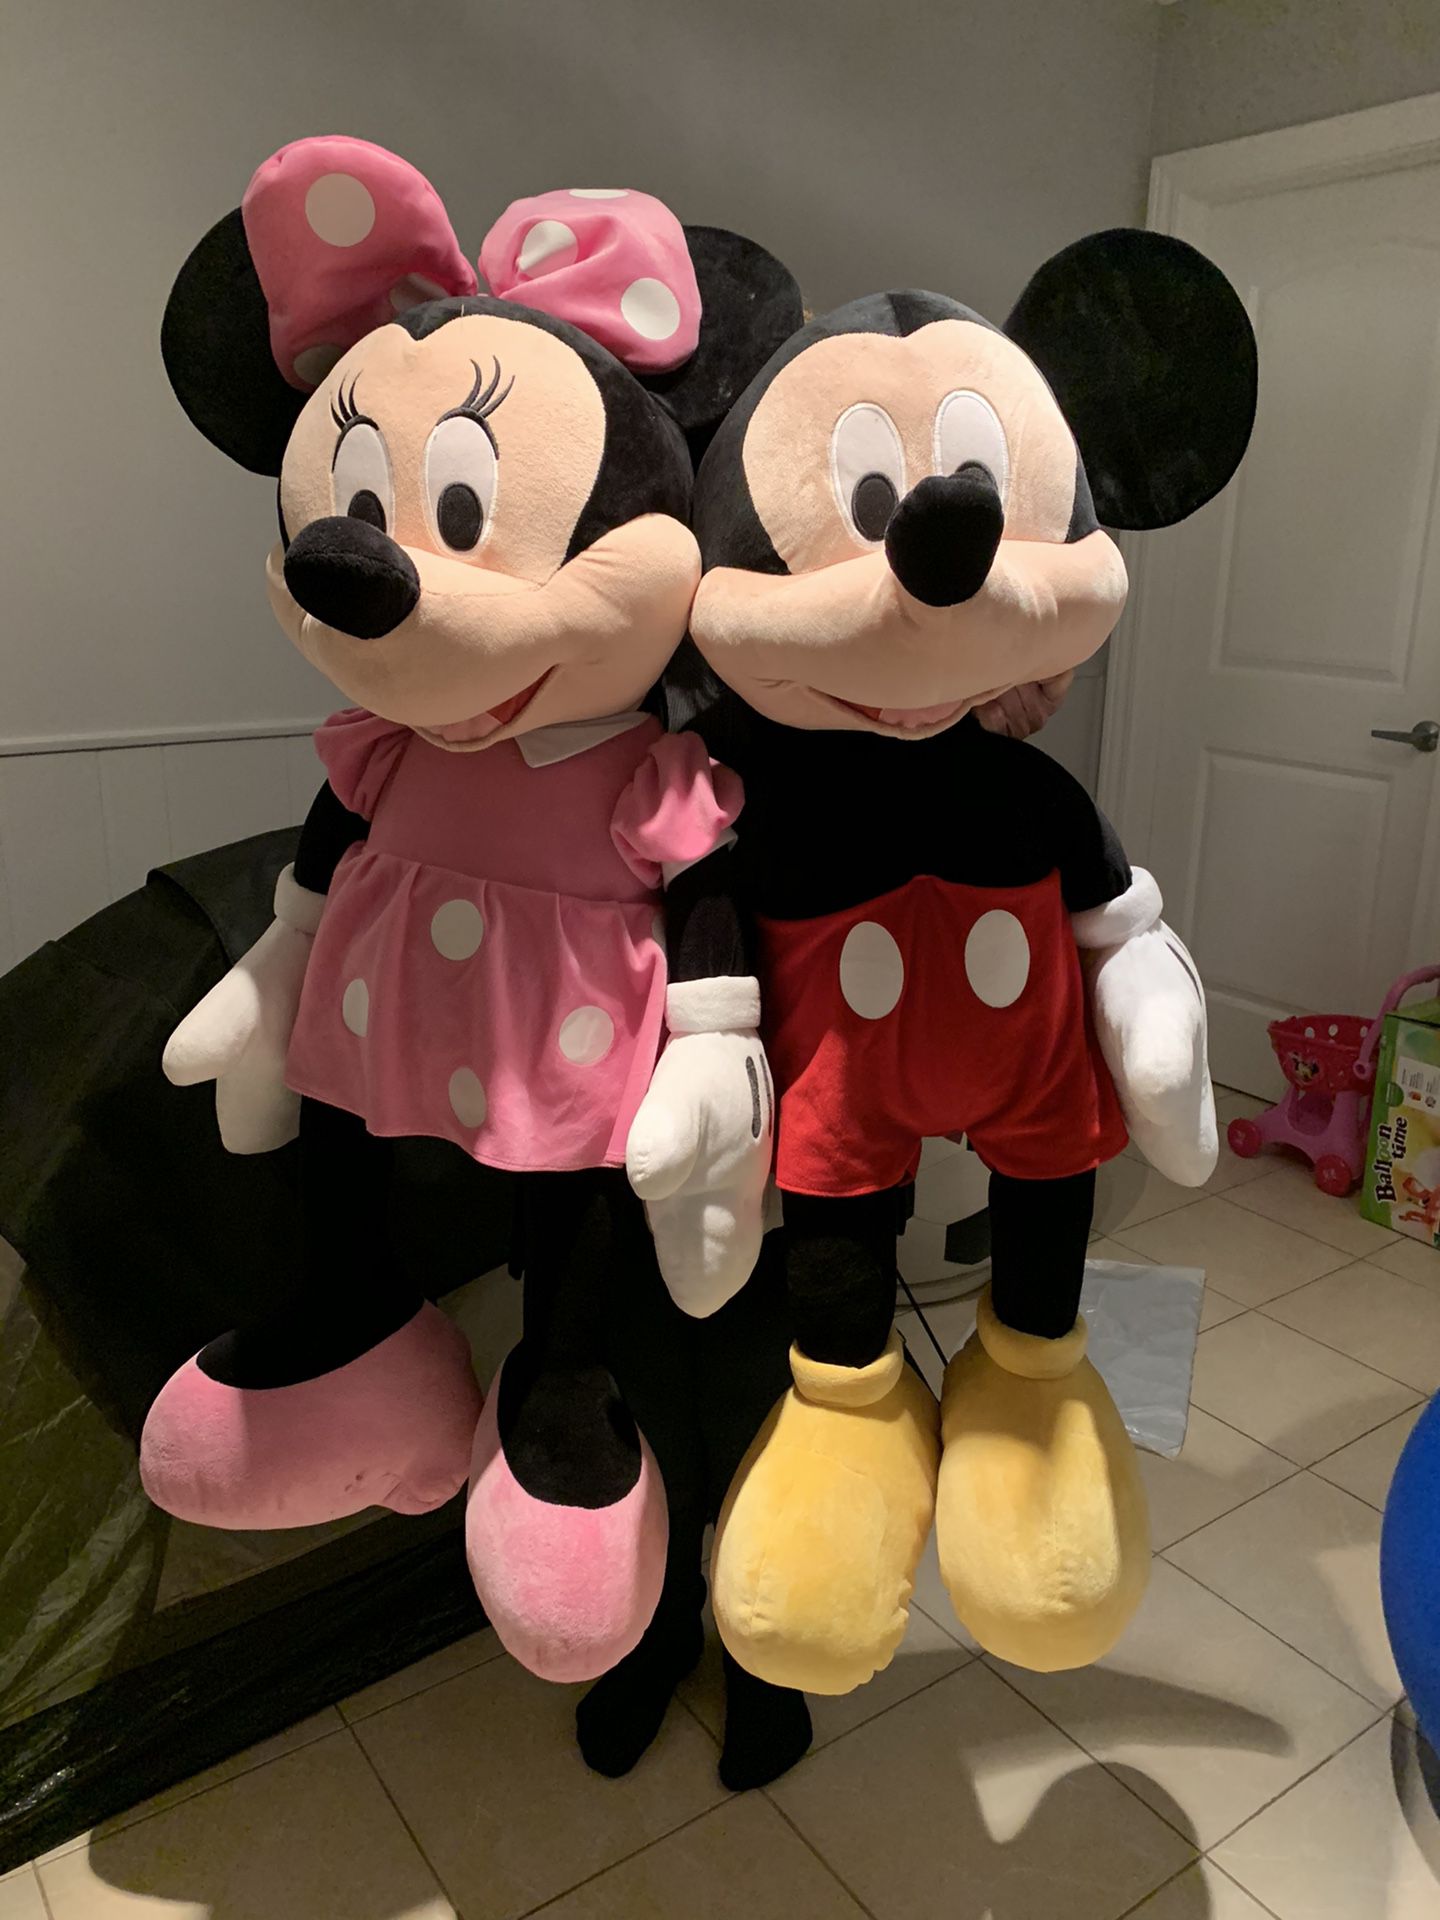 Giant Plush Toy Mickey And Minnie